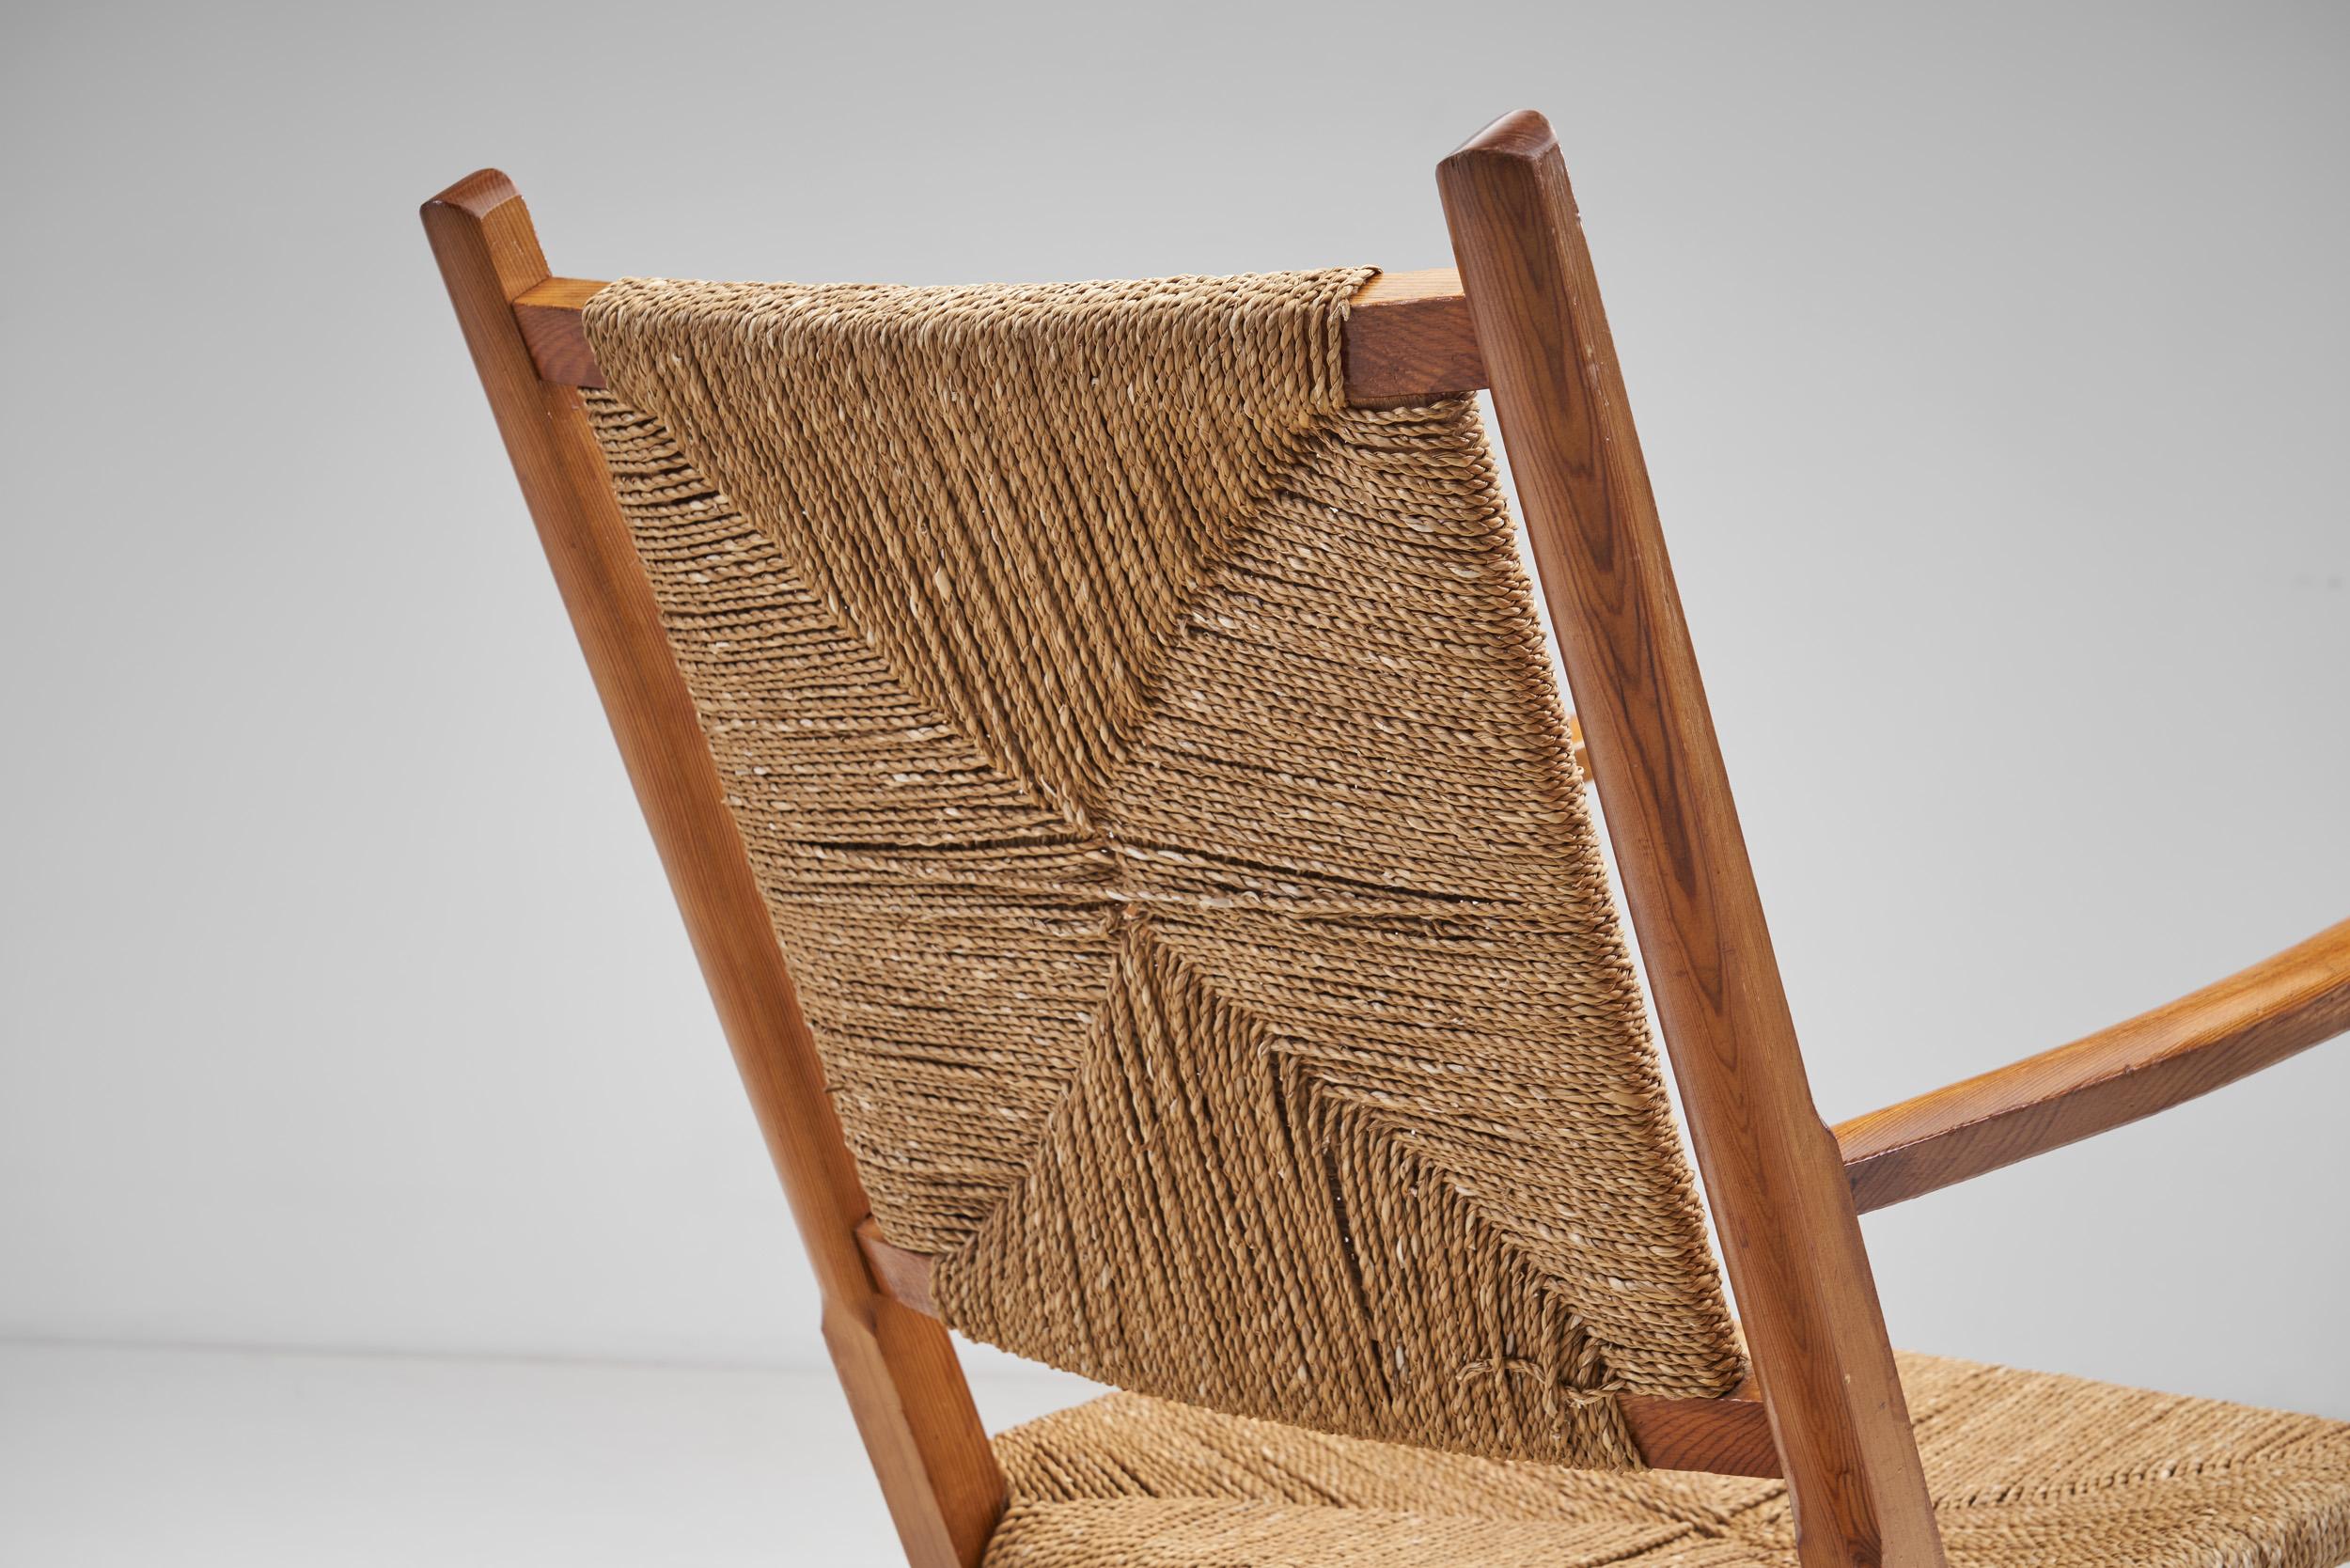 Norwegian Wood and Papercord Rocking Chairs by Slåke Møbelfabrikk, Norway 1940s For Sale 2